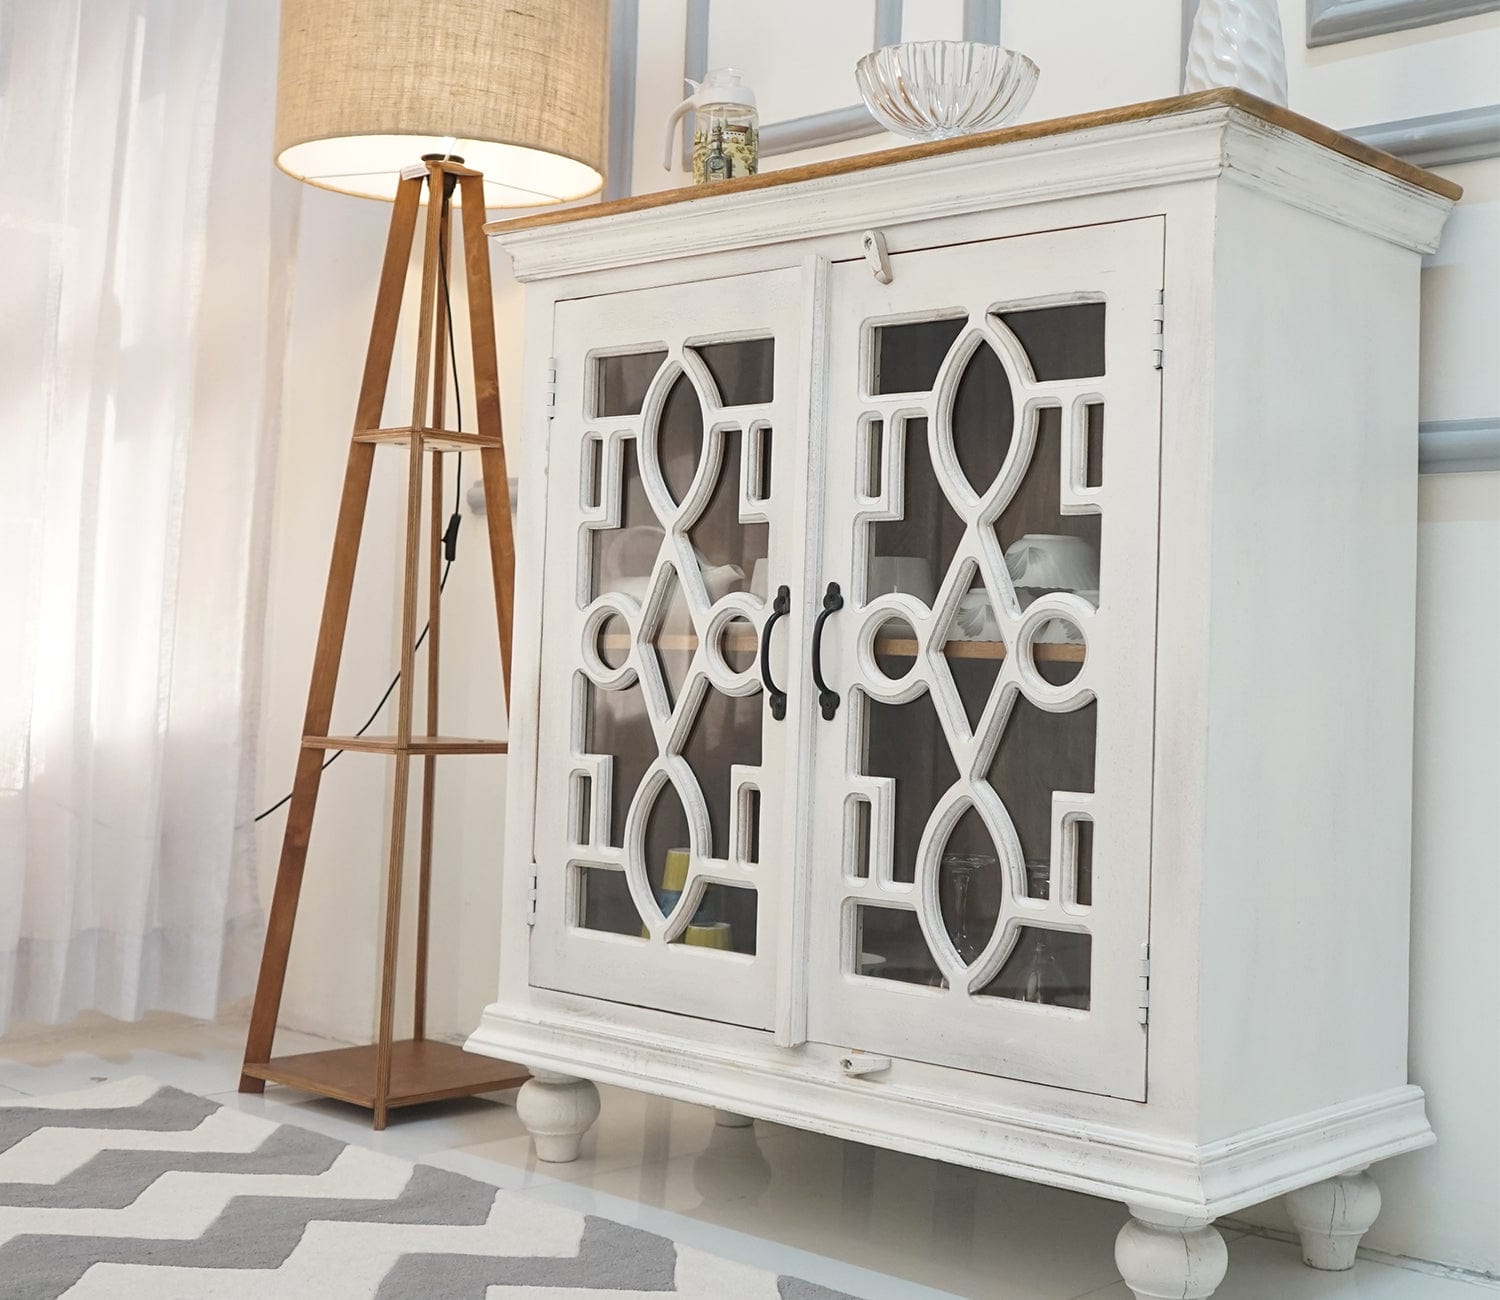 Nathan 2 Door Cabinets and Sideboard (White Finish)